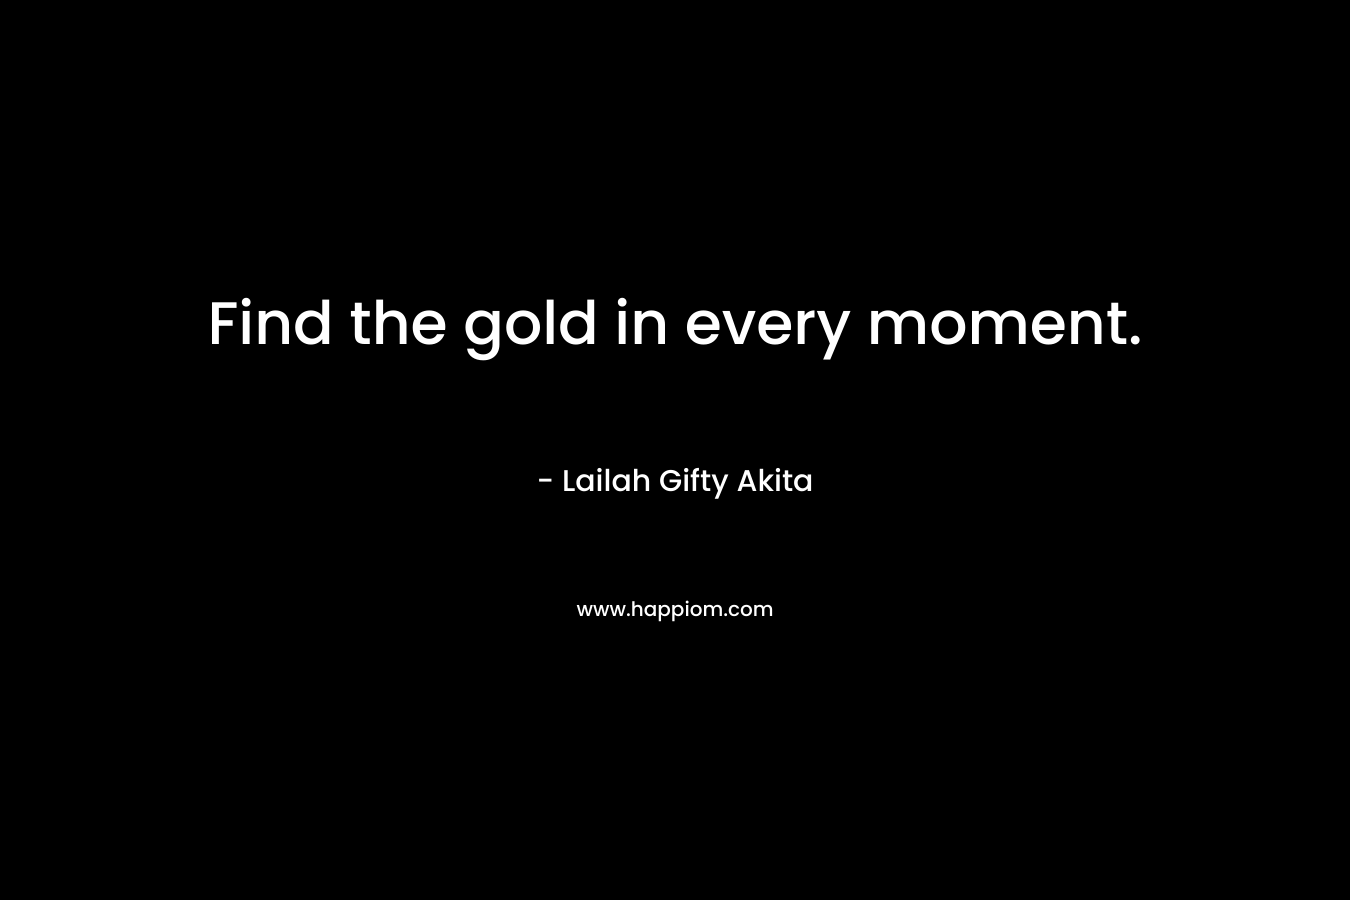 Find the gold in every moment.